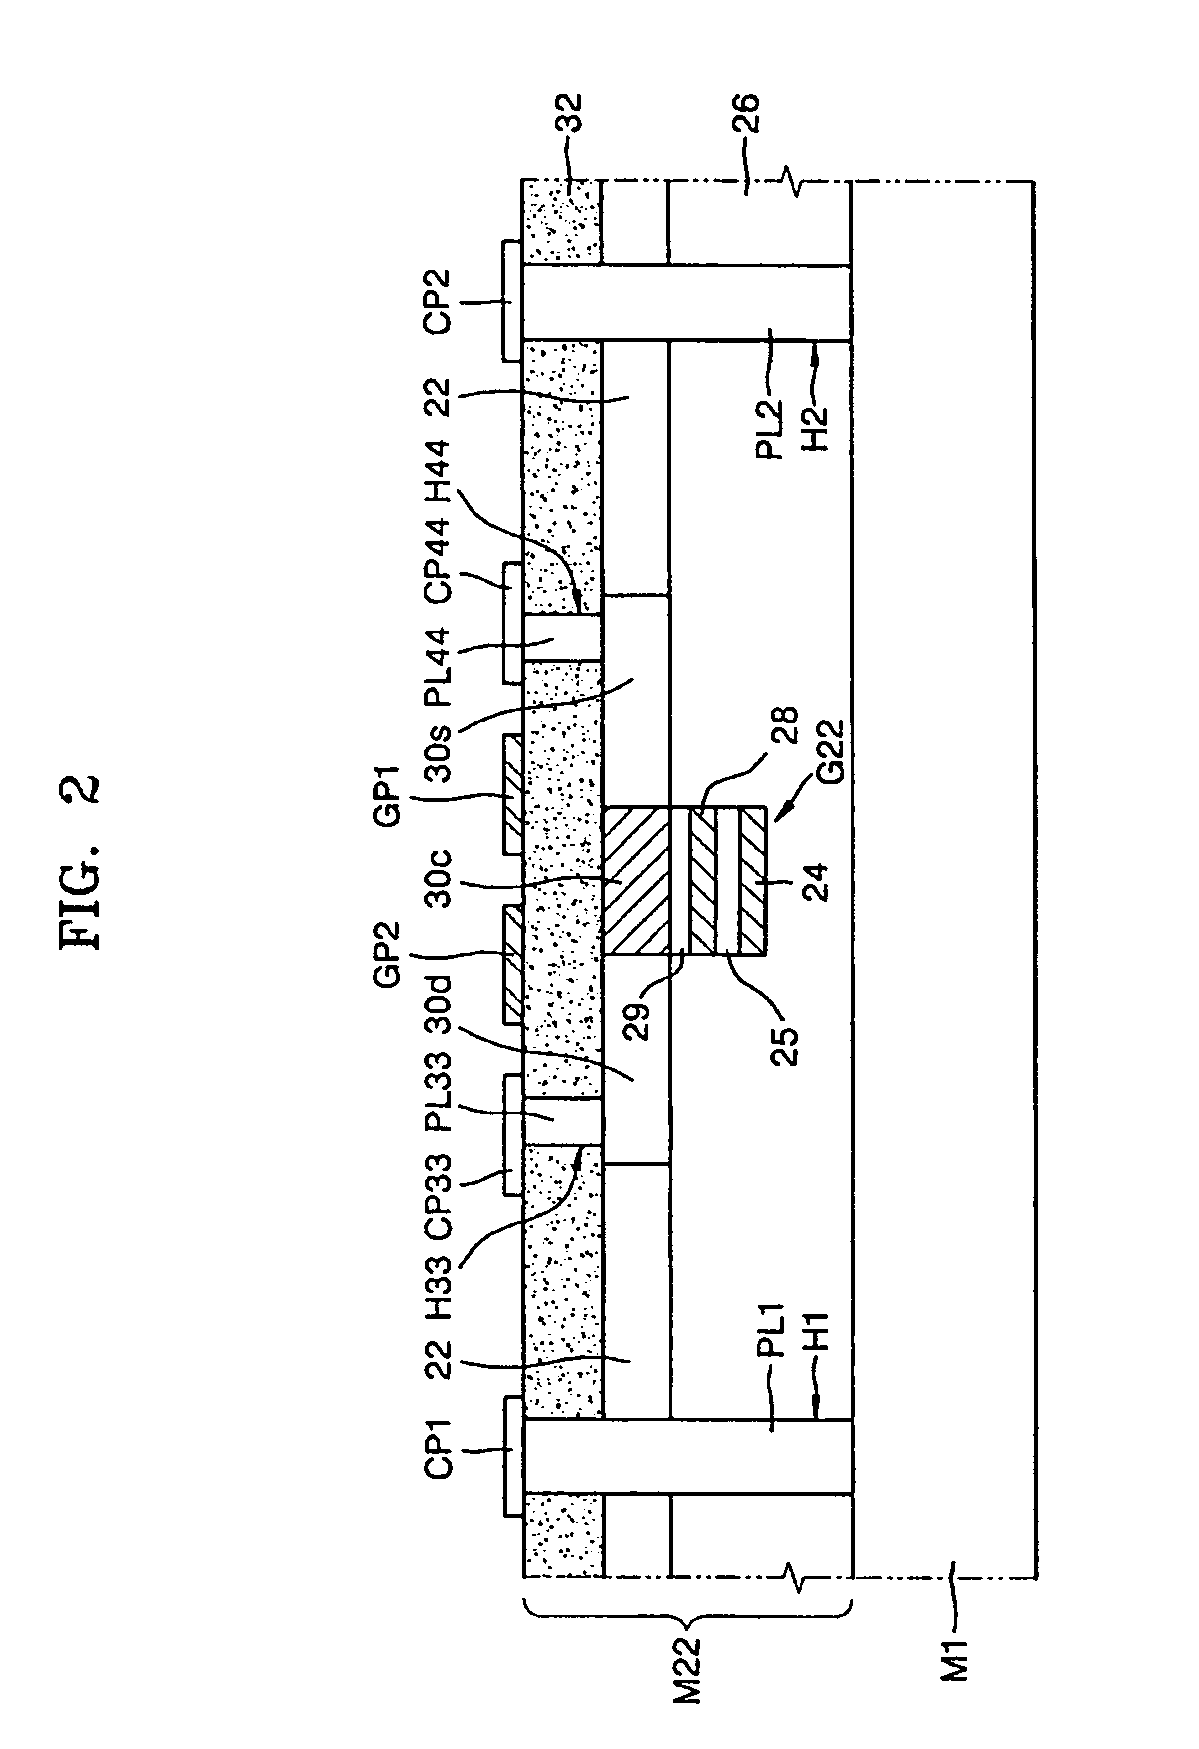 Methods of operating and manufacturing logic device and semiconductor device including complementary nonvolatile memory device, and reading circuit for the same